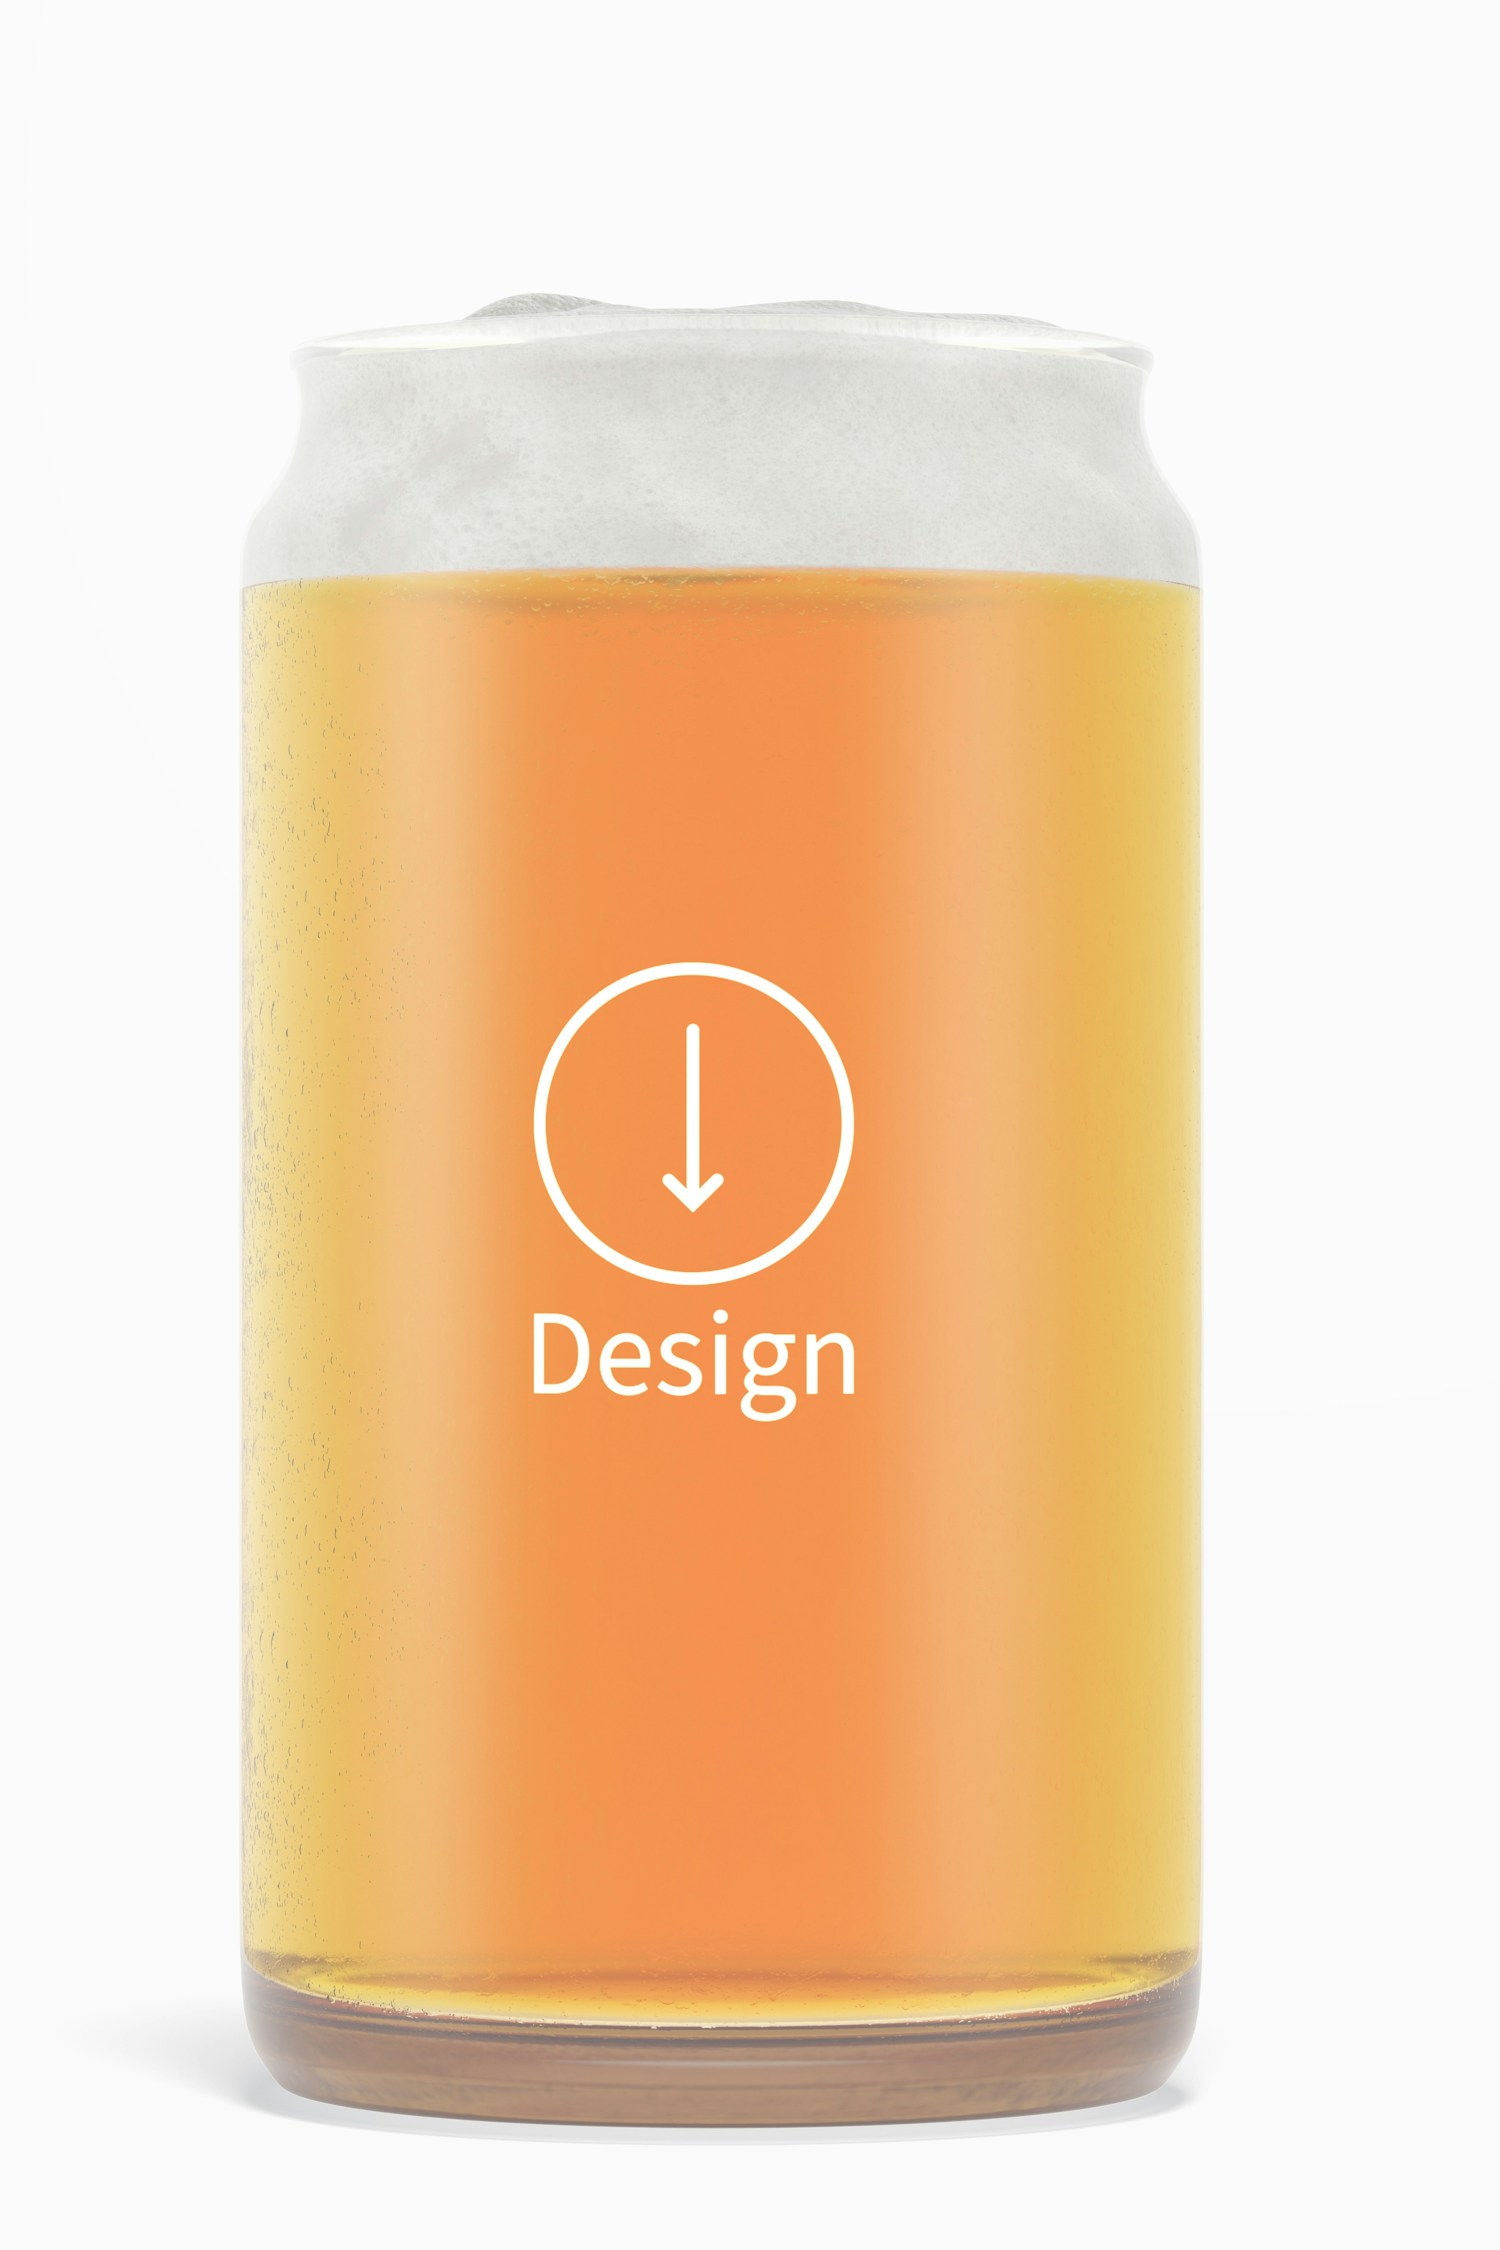 16 oz Glass Beer Cup Mockup, Front View